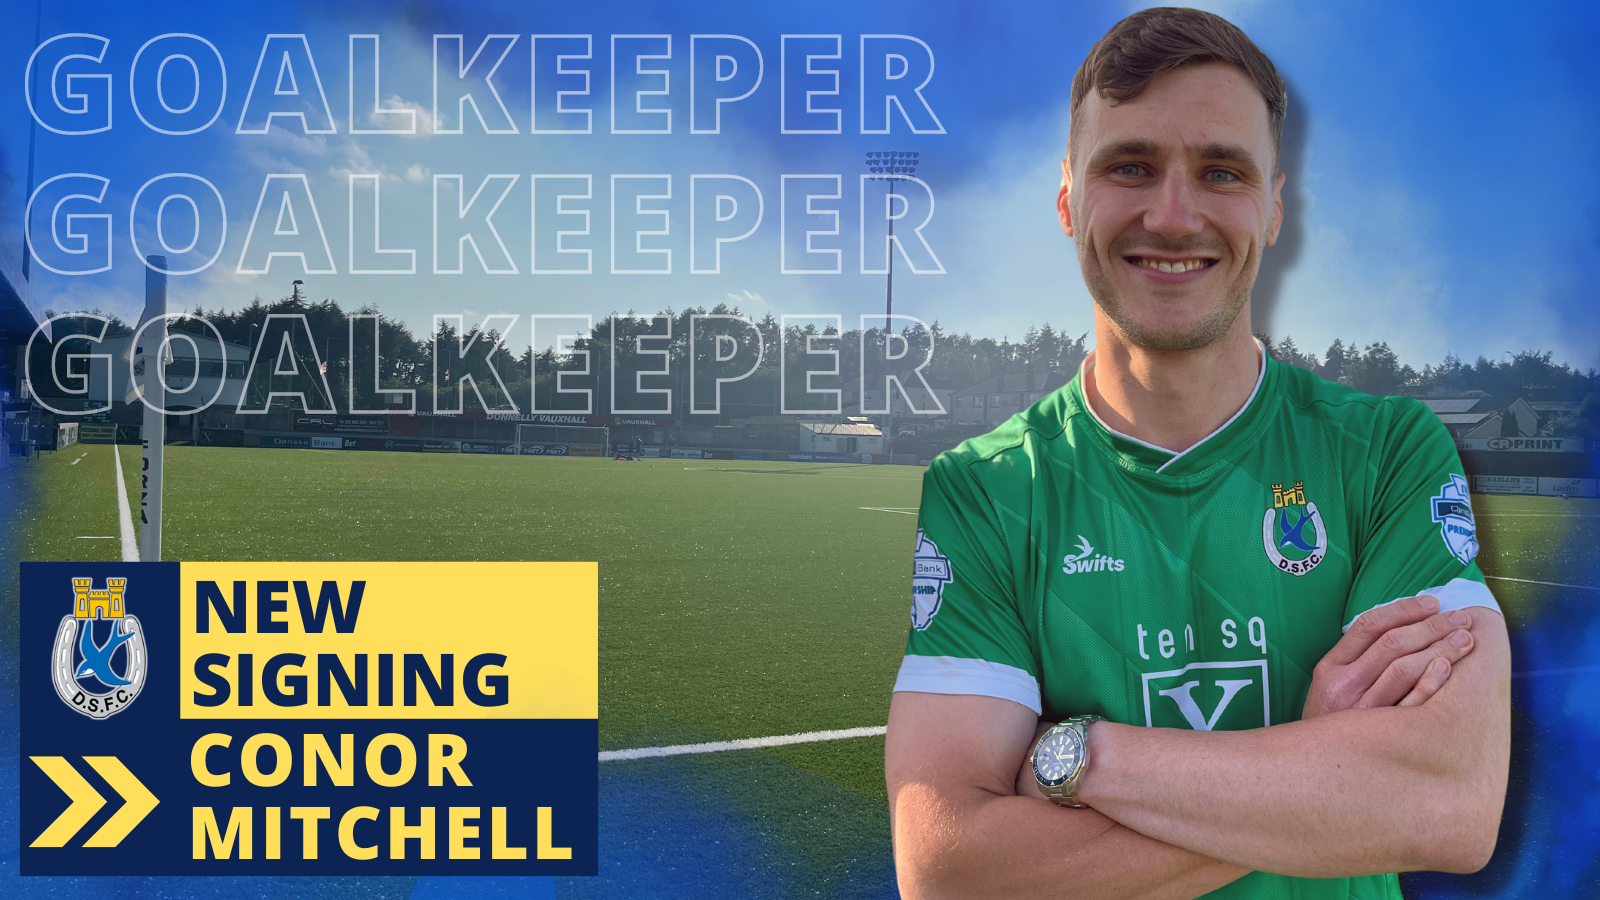 TRANSFER NEWS | MITCHELL TO STANGMORE